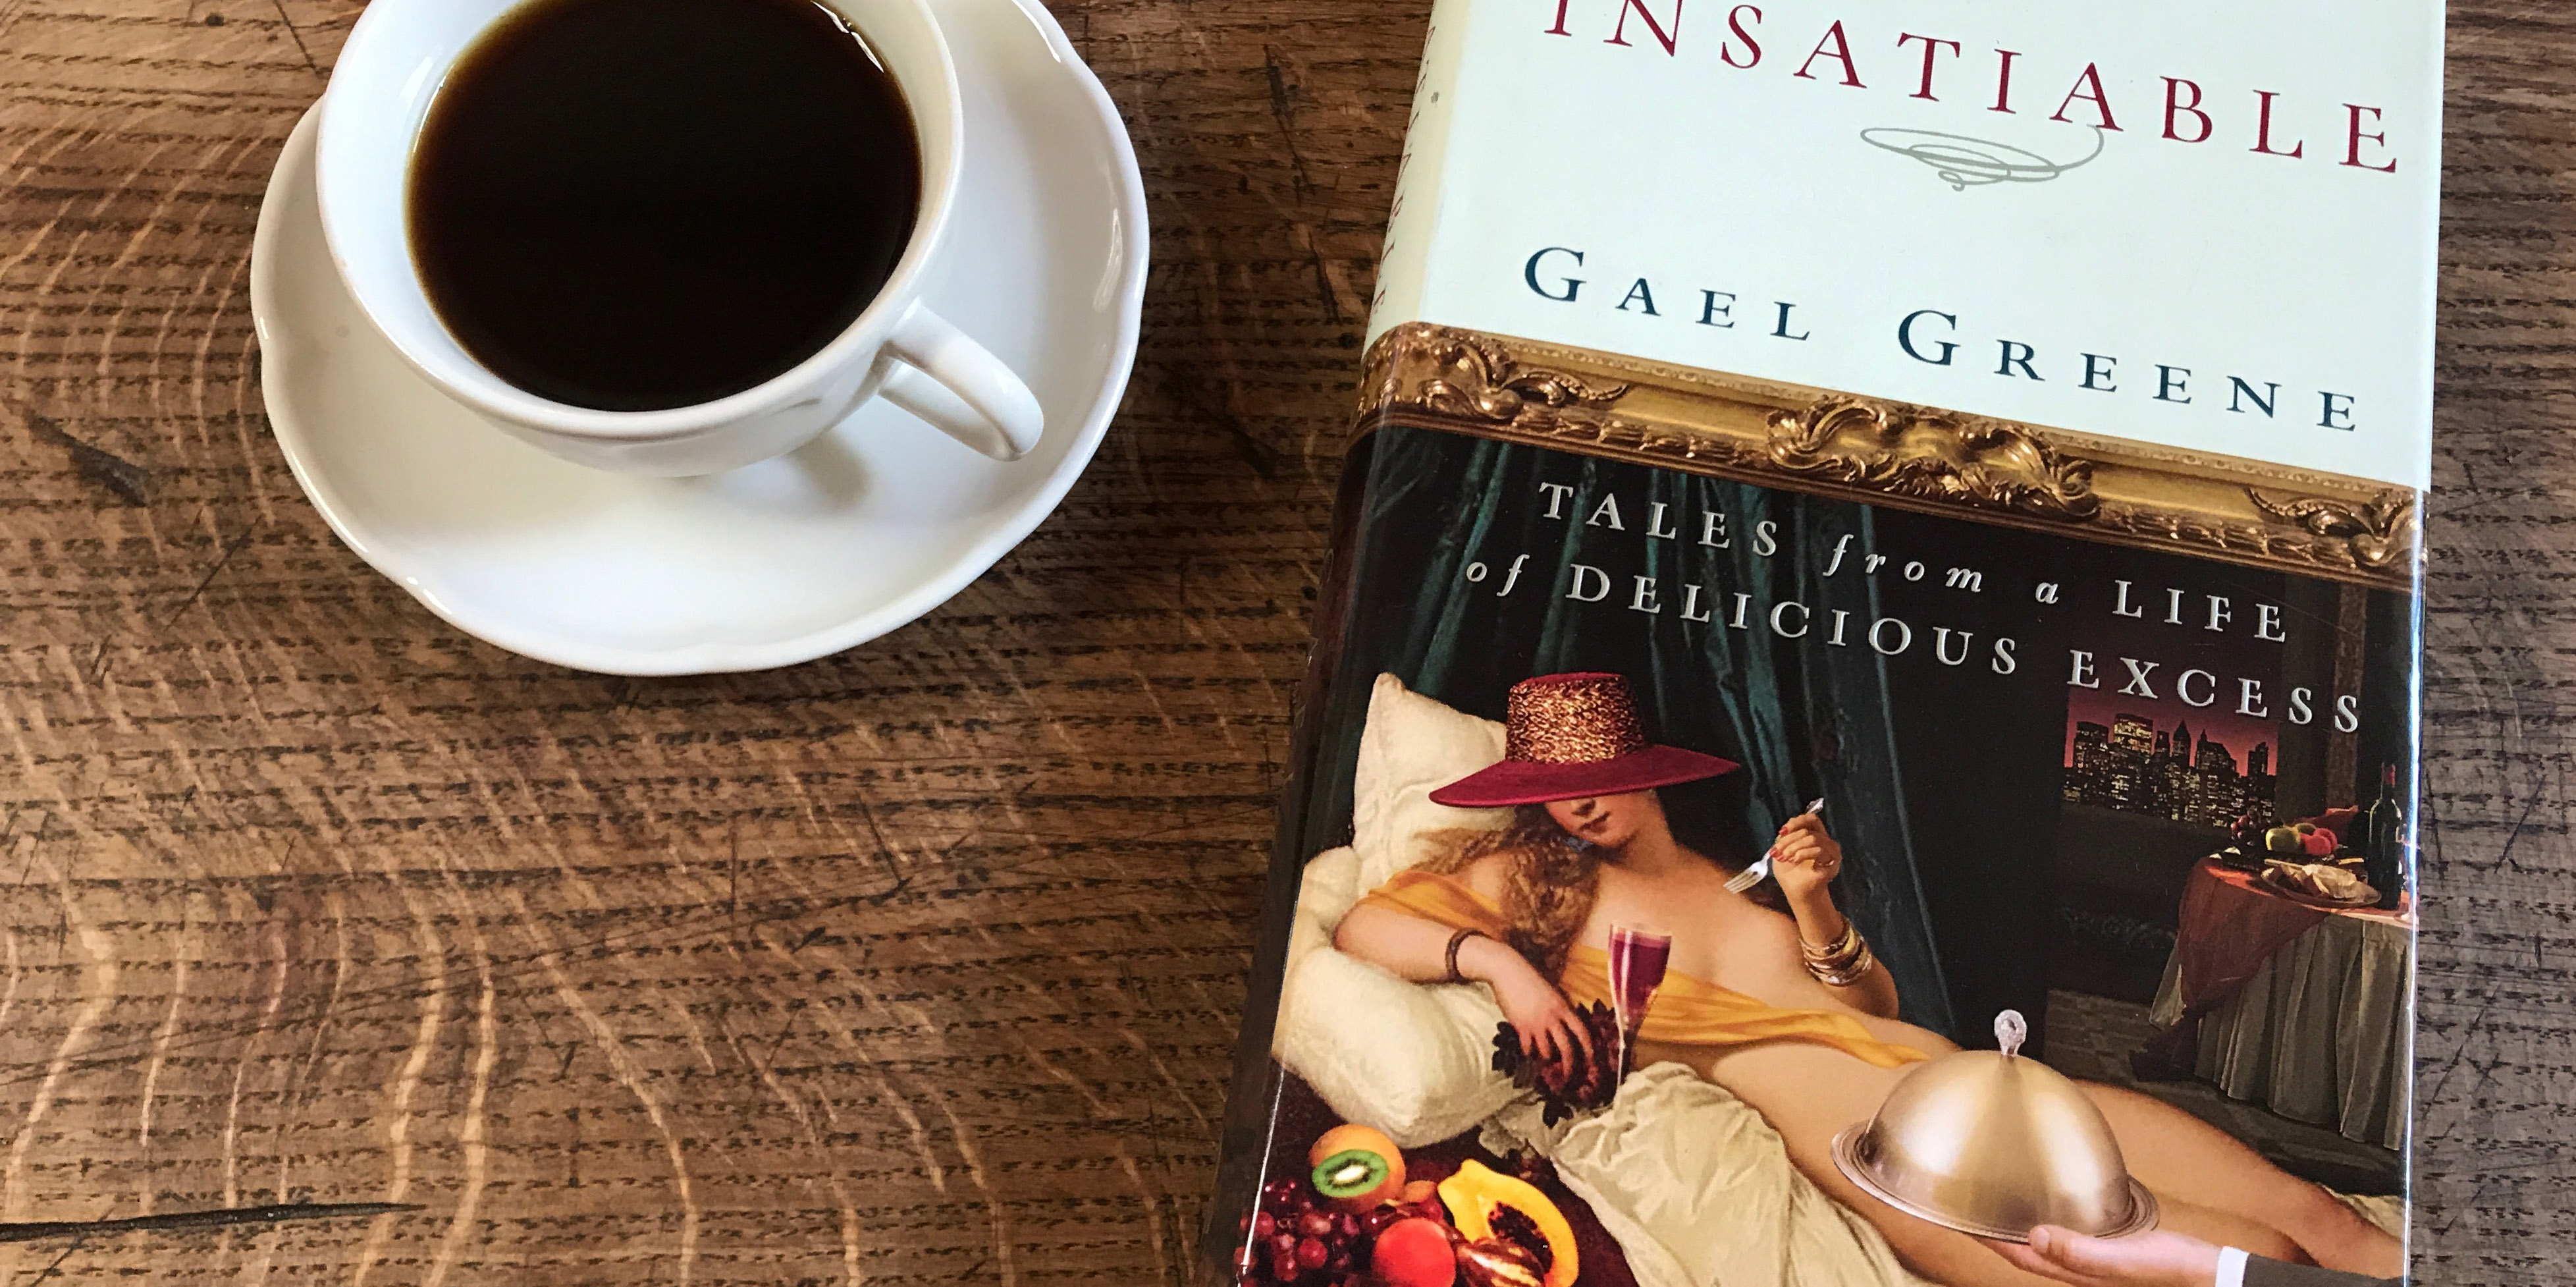 Piccolo: Insatiable: Tales From a Life of Delicious Excess, by Gael Greene, One